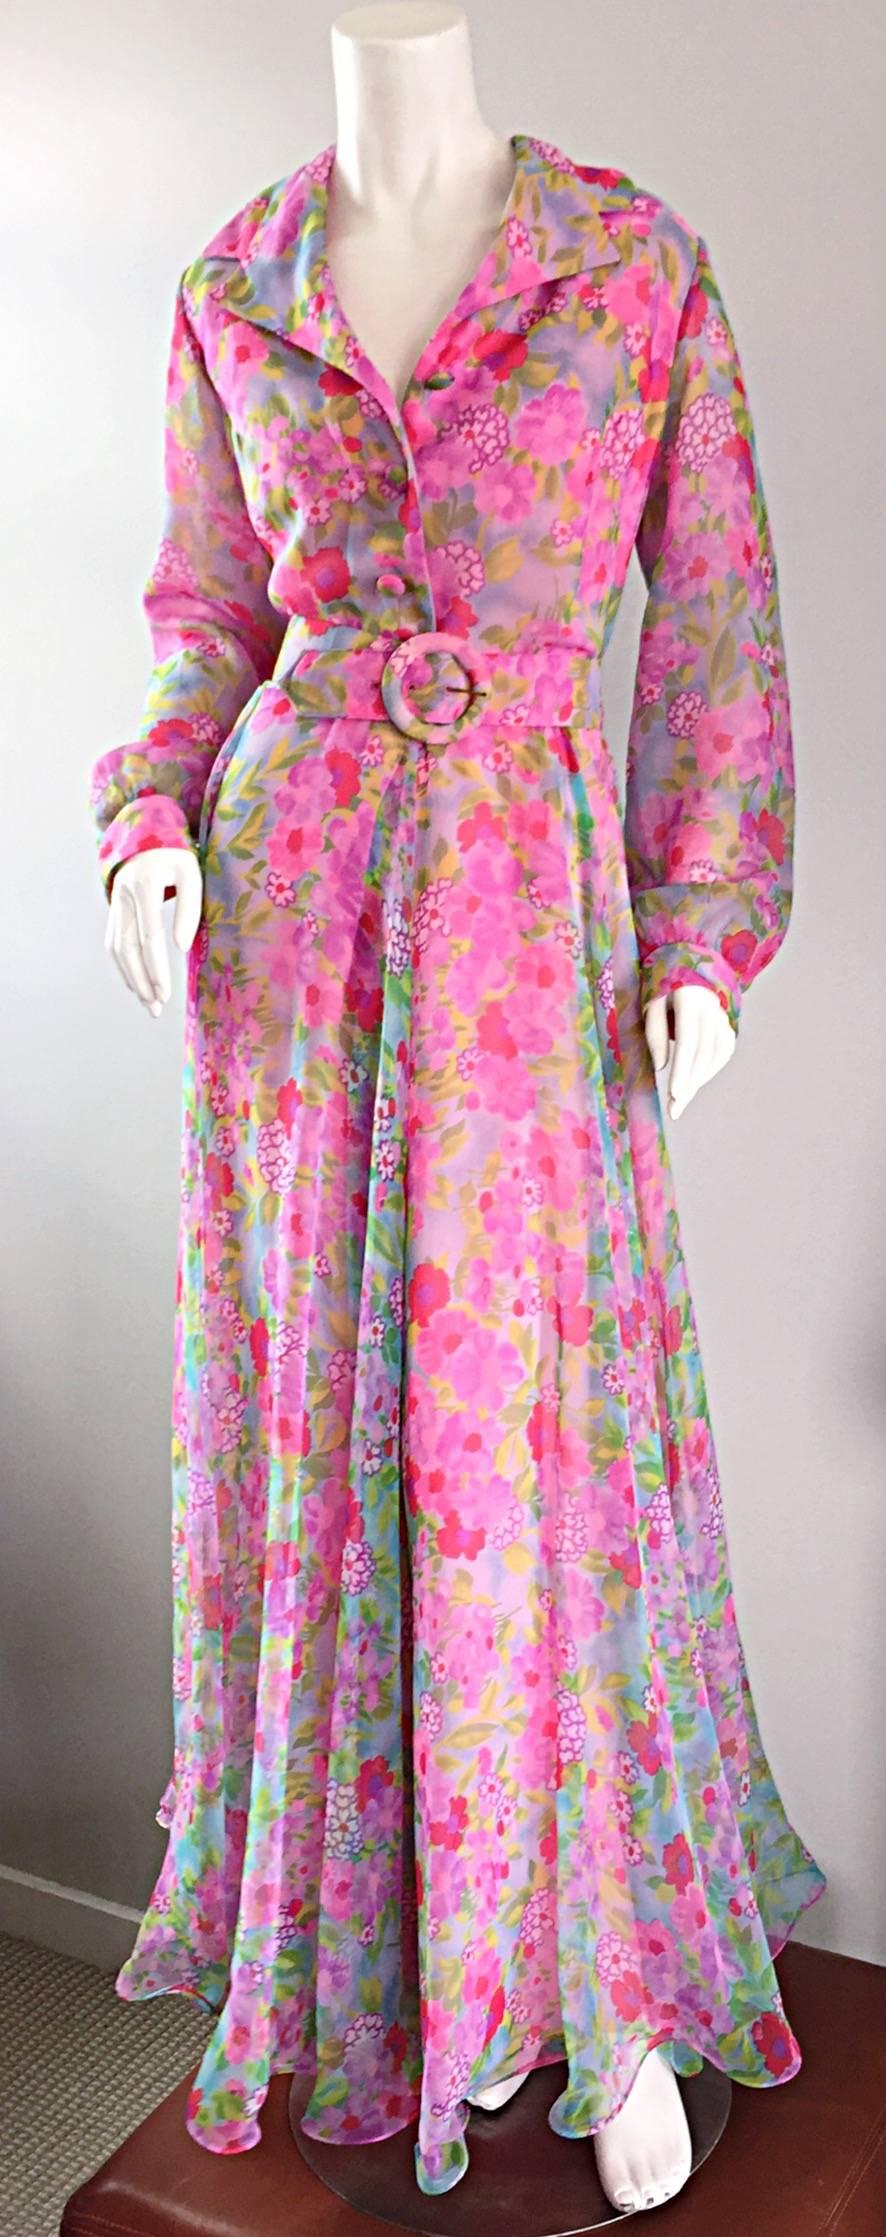 Gorgeous 70s ELLIETTE LEWIS (Miss Elliette) chiffon long sleeve belted maxi dress! Incredible floral print, with vibrant colors of purple, fuchsia, pink, green, and blue! Pictures do not even do this gem justice! Fitted chiffon bodice, with chiffon